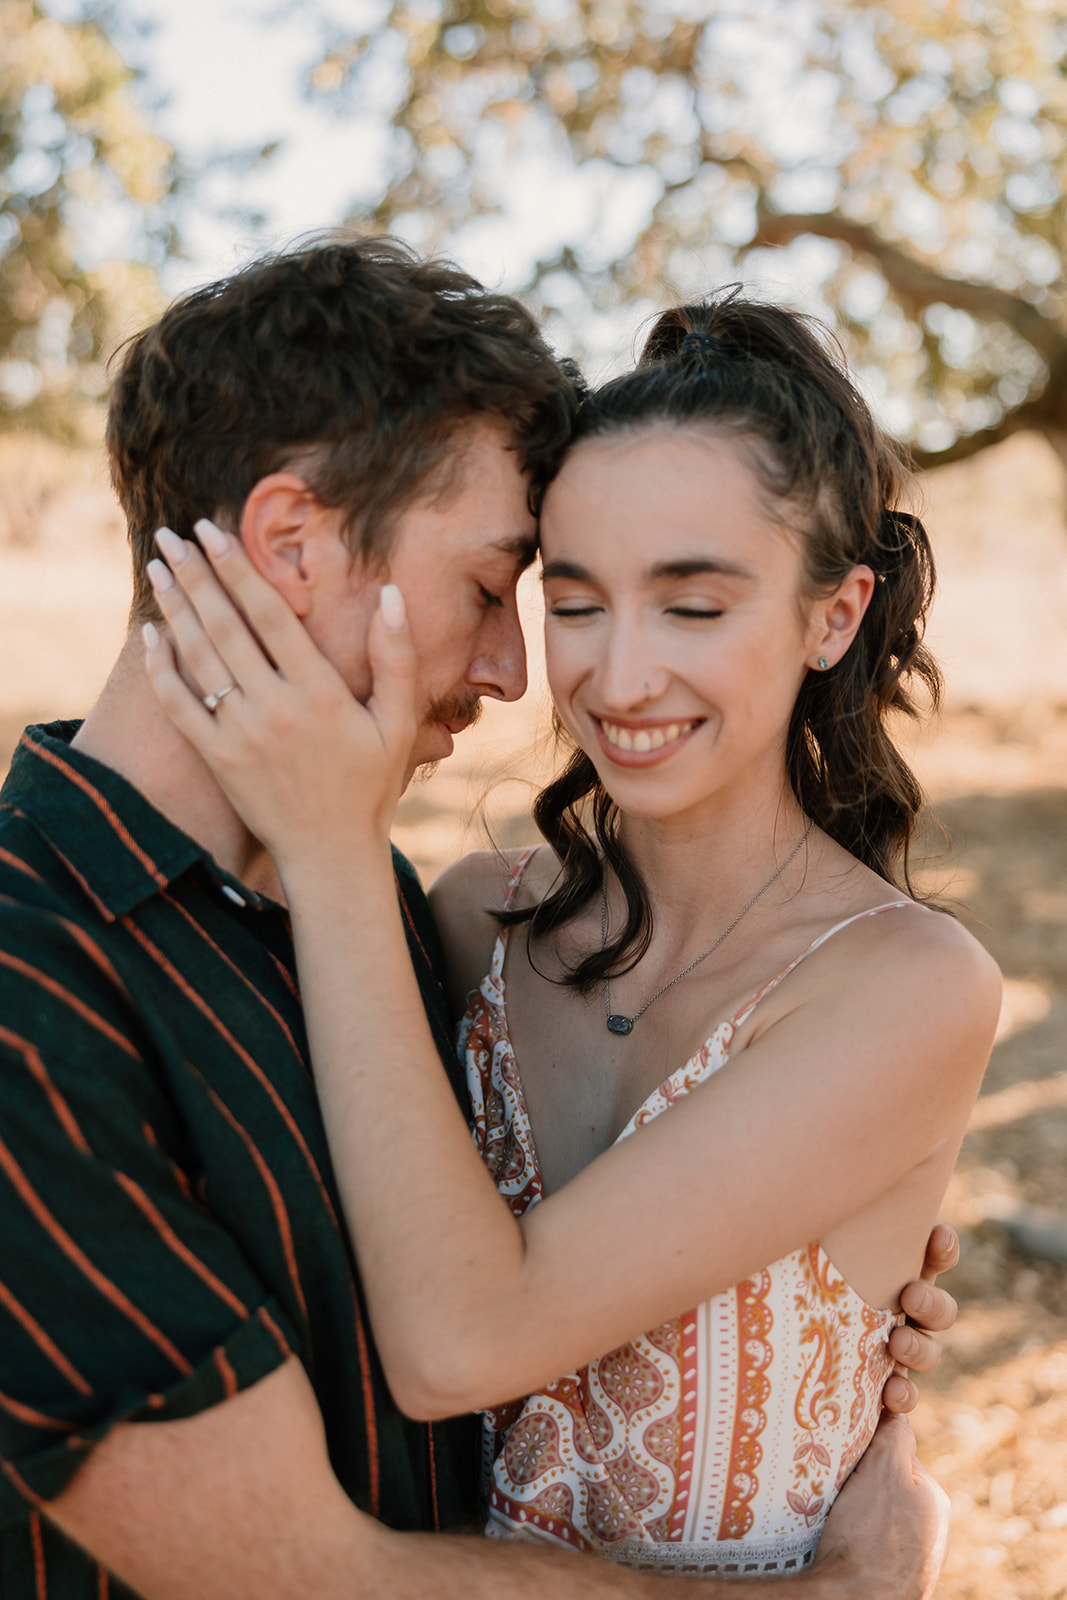 A couple embracing under a tree, exchanging a loving gaze, dressed in casual summer attire for their park engagement photos.